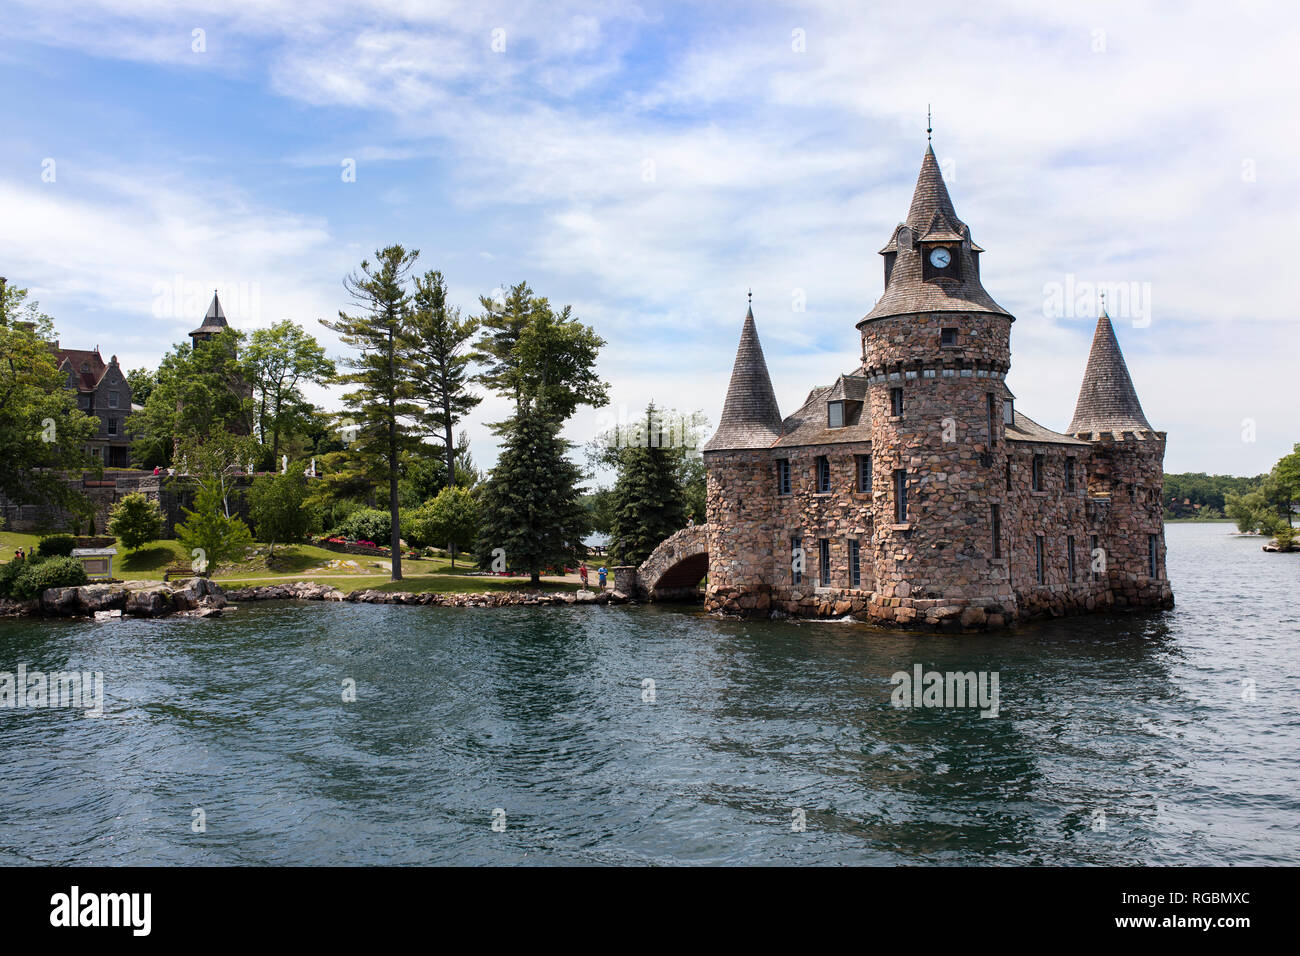 The Thousand Islands Region, Ontario, Canada, June 17, 2018: The Power House of The Boldt Castle located on Heart Island Stock Photo